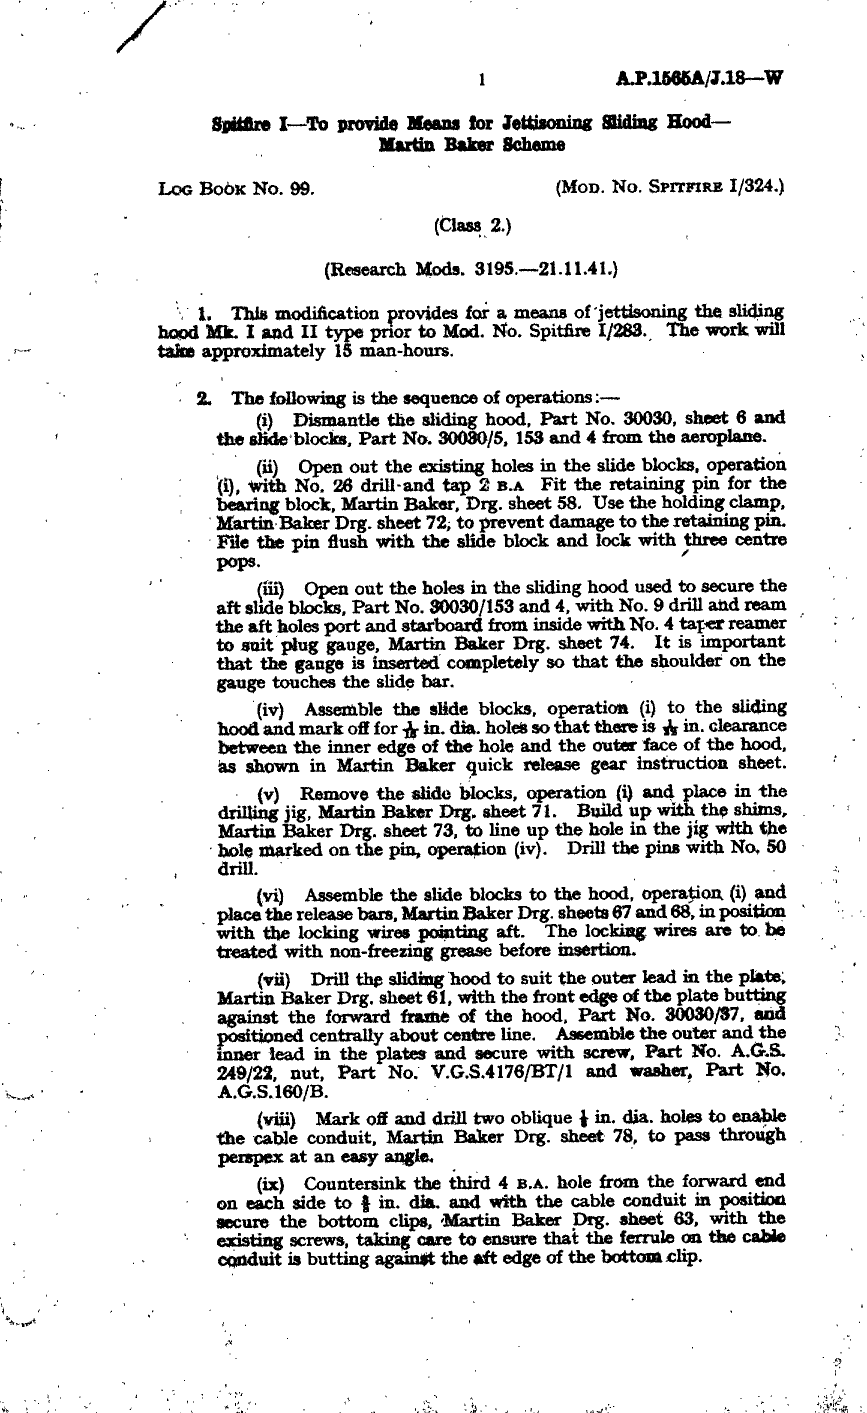 Sample page 1 from AirCorps Library document: Spitfire I To Provide Means for Jettisoning Sliding Hood Martin Baker Scheme